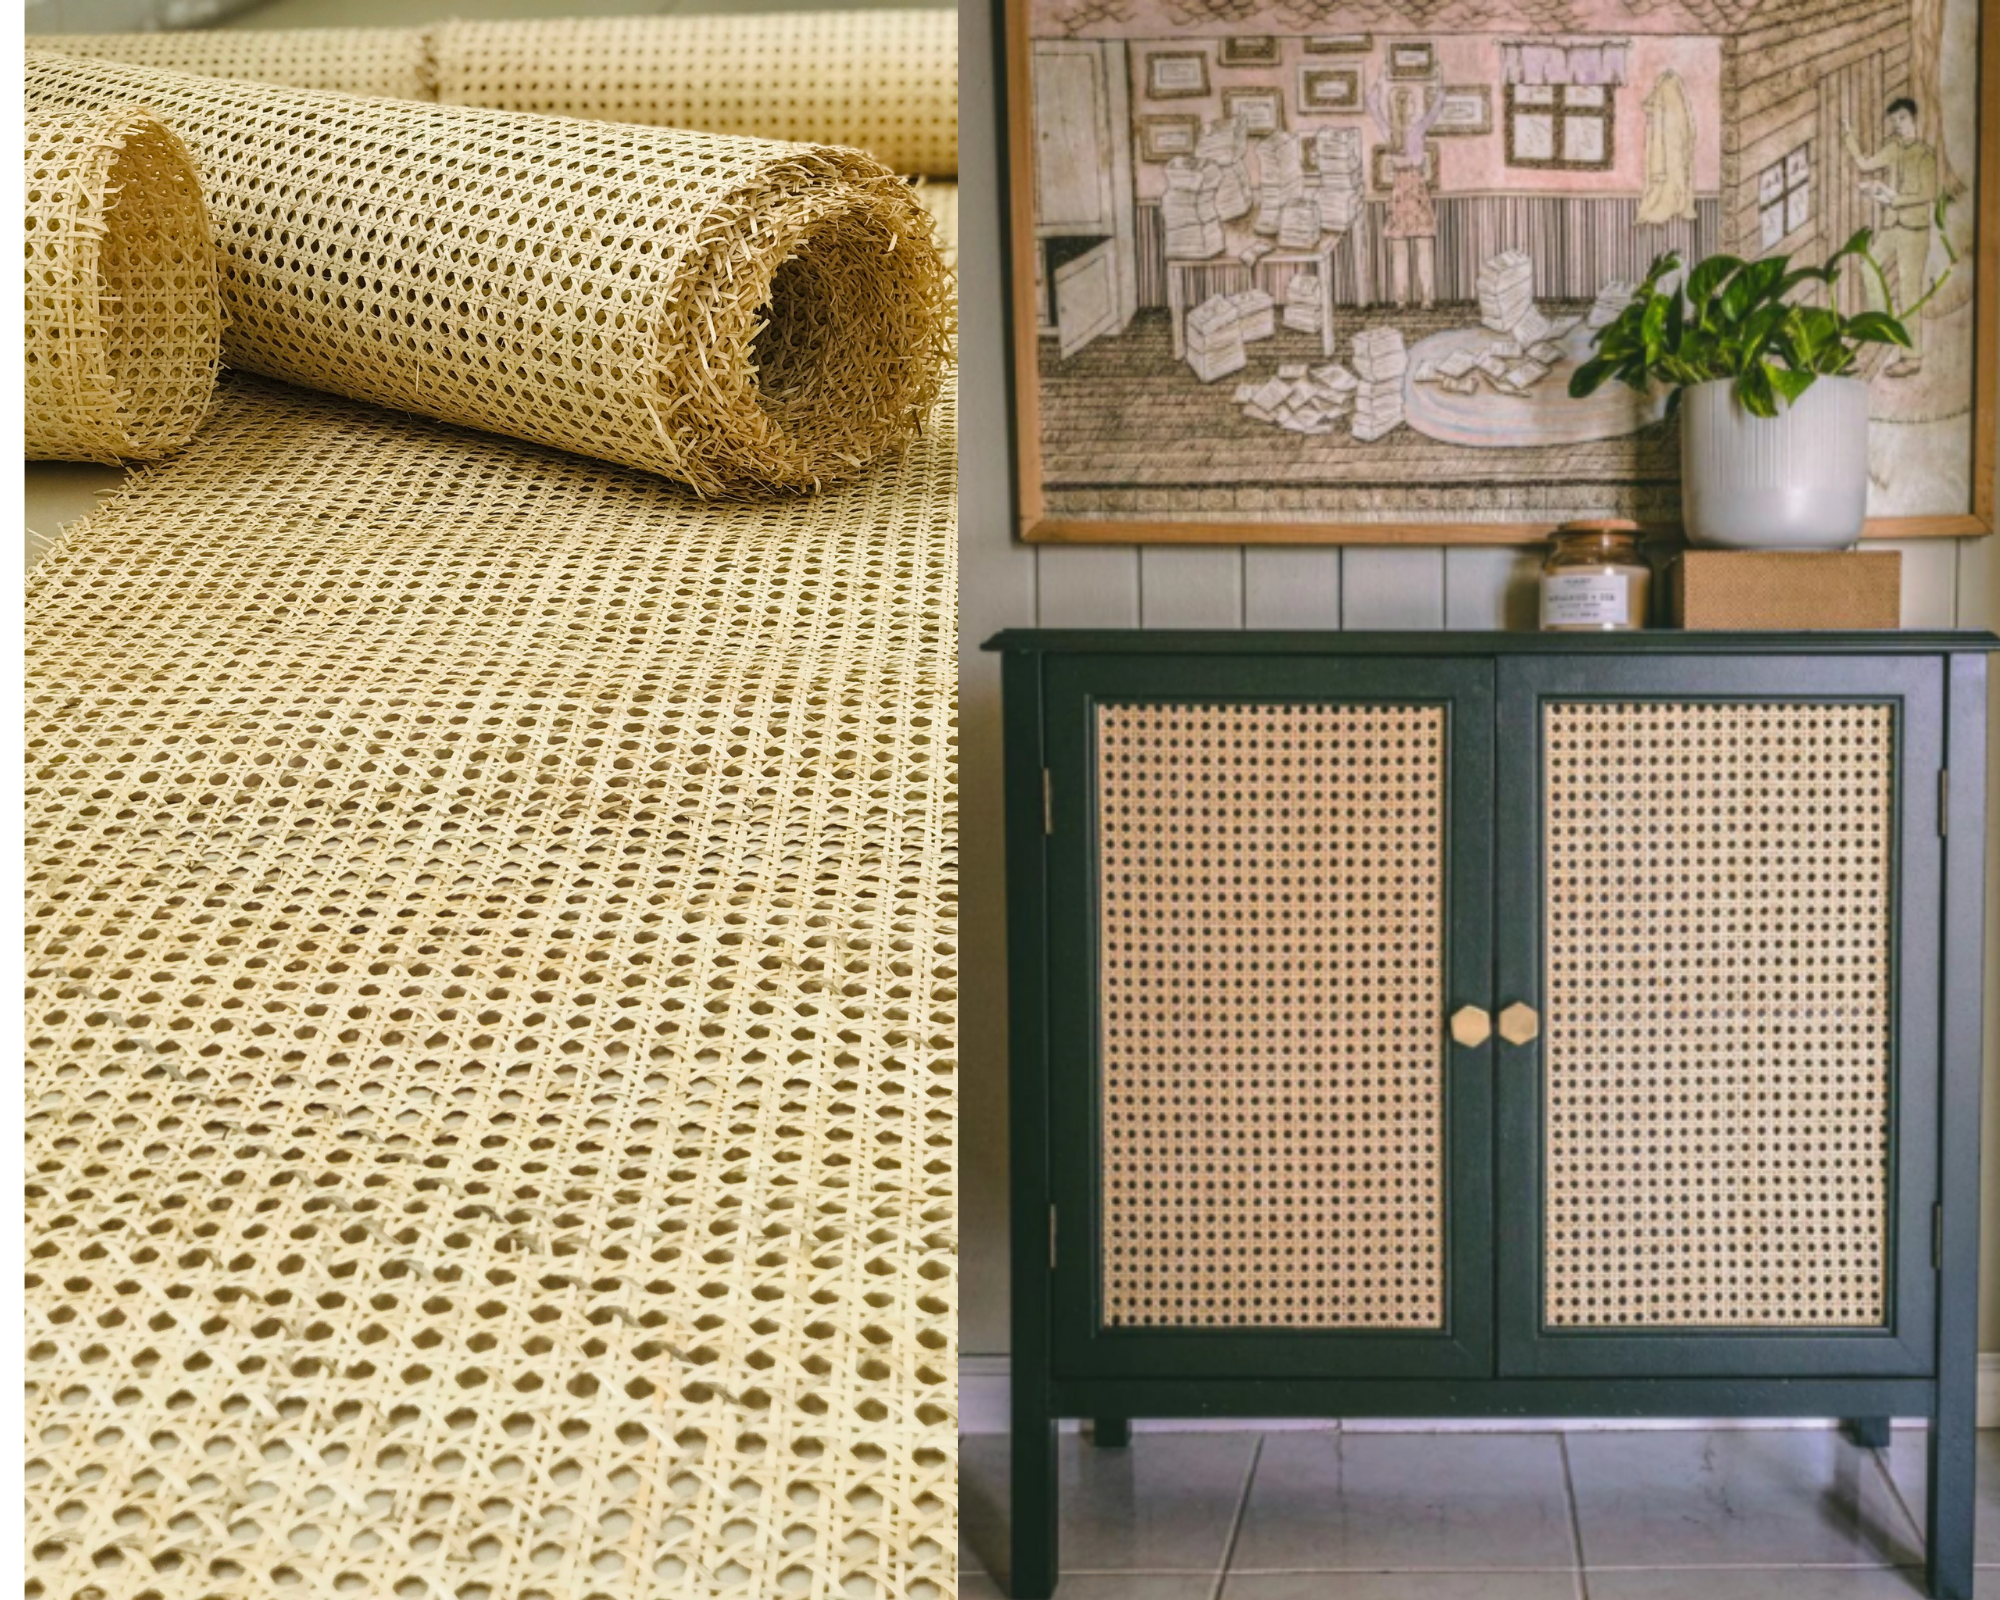 Natural Square Rattan Webbing for Caning Chair, DIY: WIDTH 36 - Rattan  Fabric